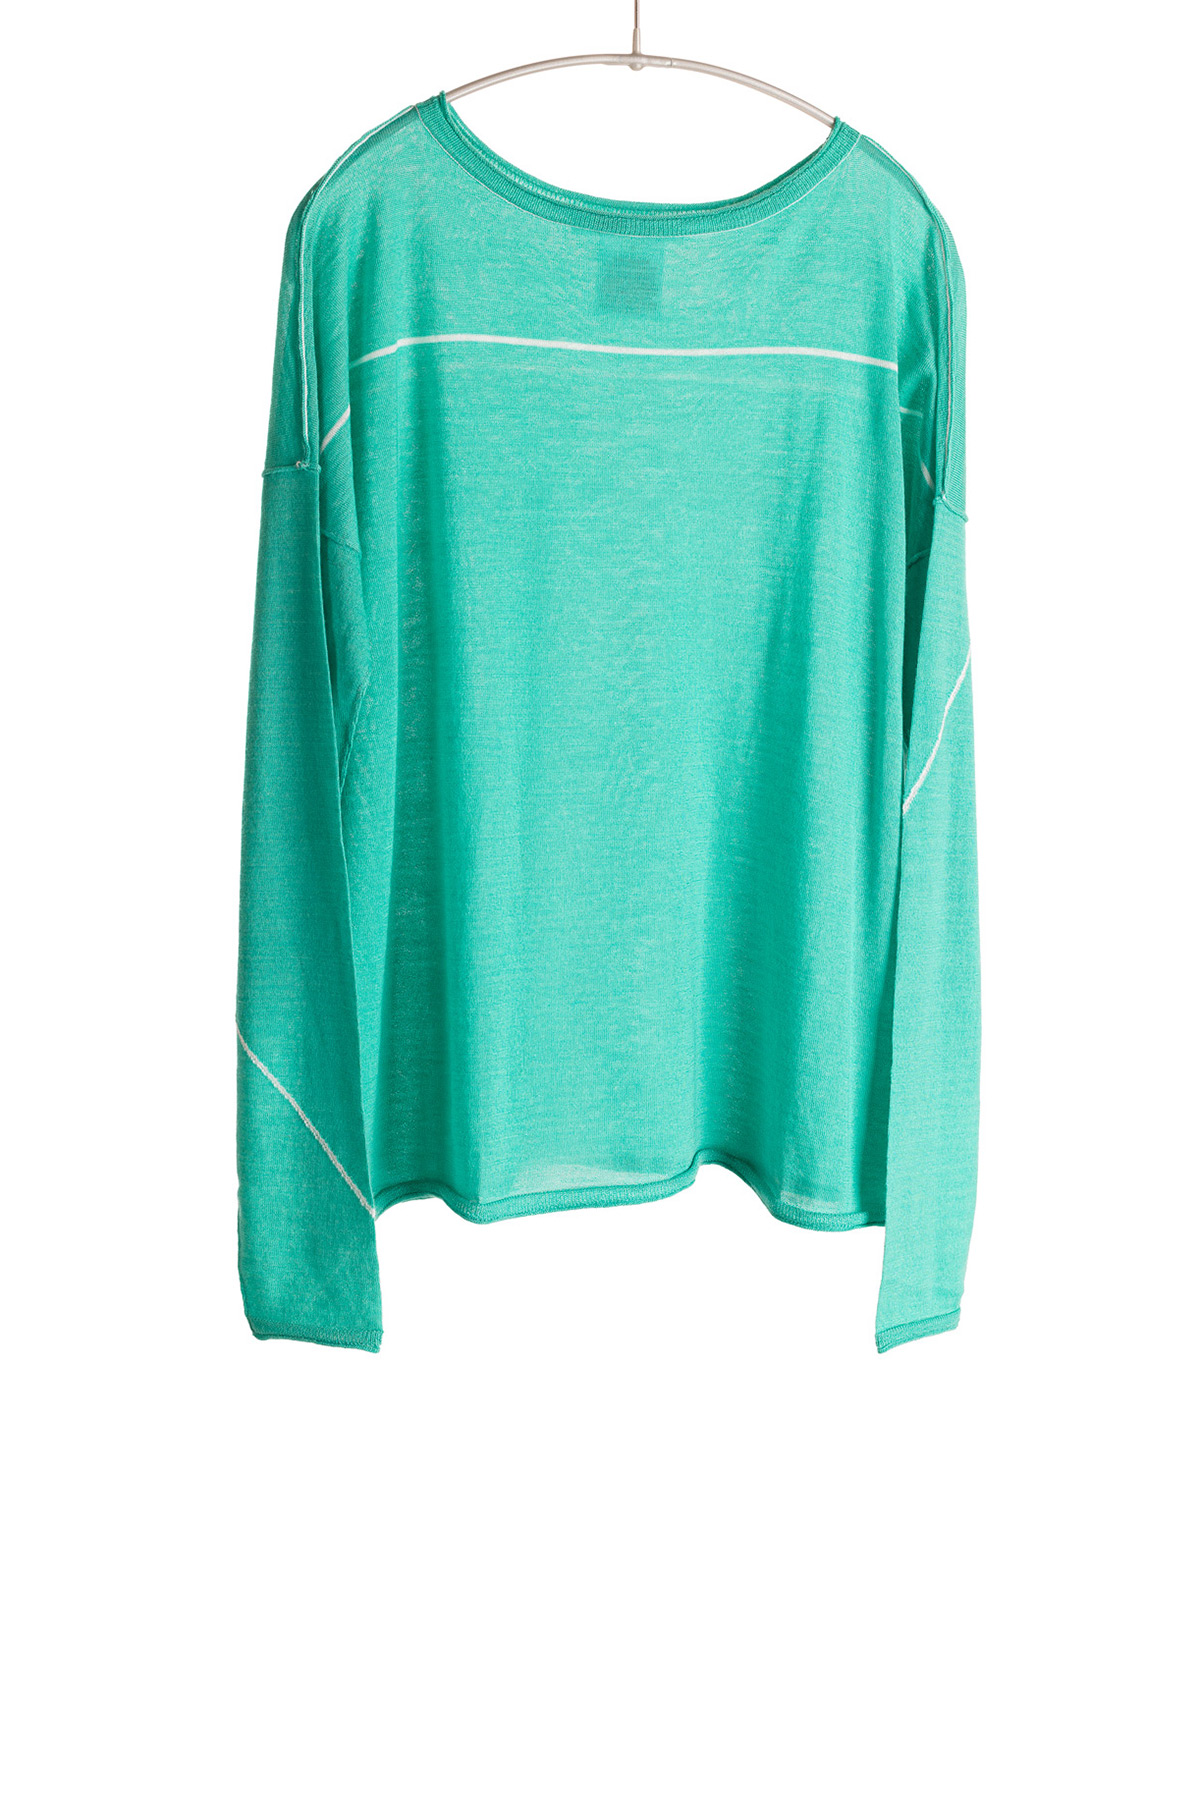 S407_BateauPullover_Turquoise_H1Front